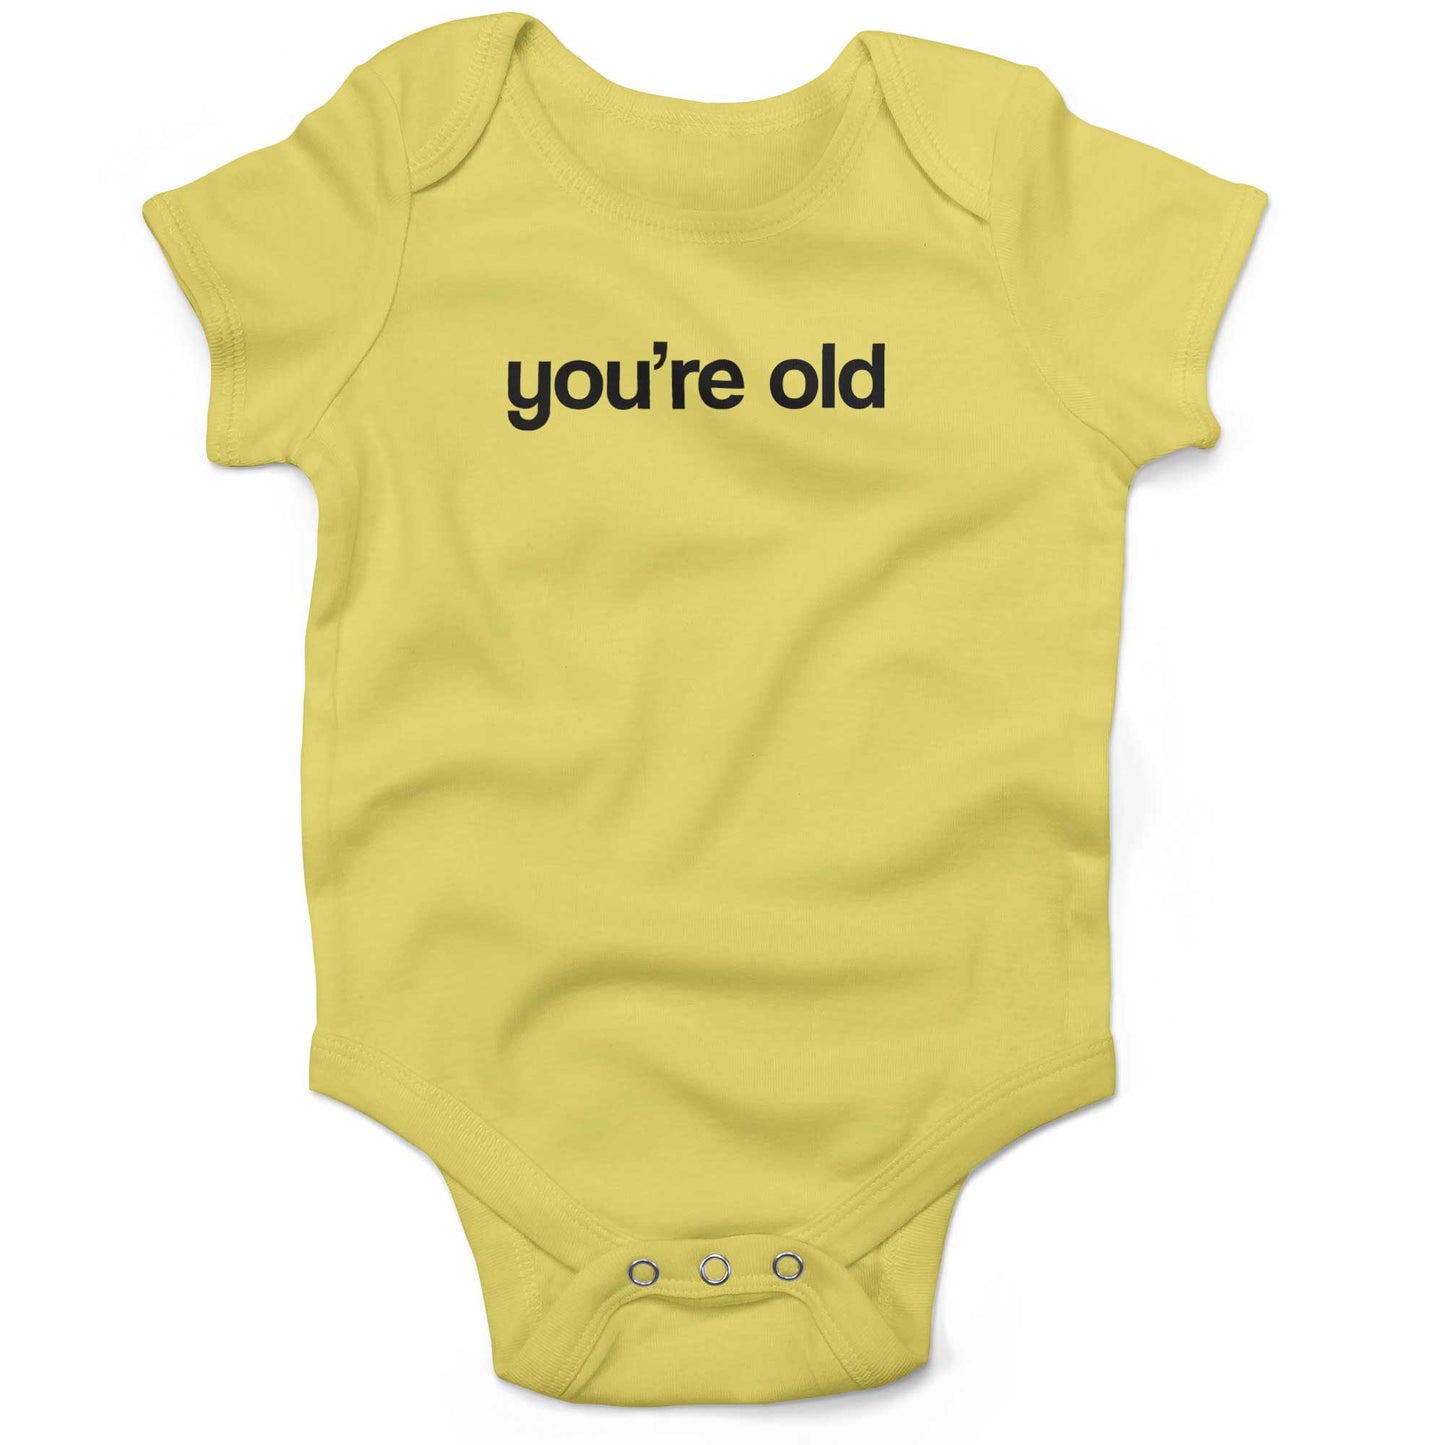 You're Old Infant Bodysuit or Raglan Tee-Yellow-3-6 months